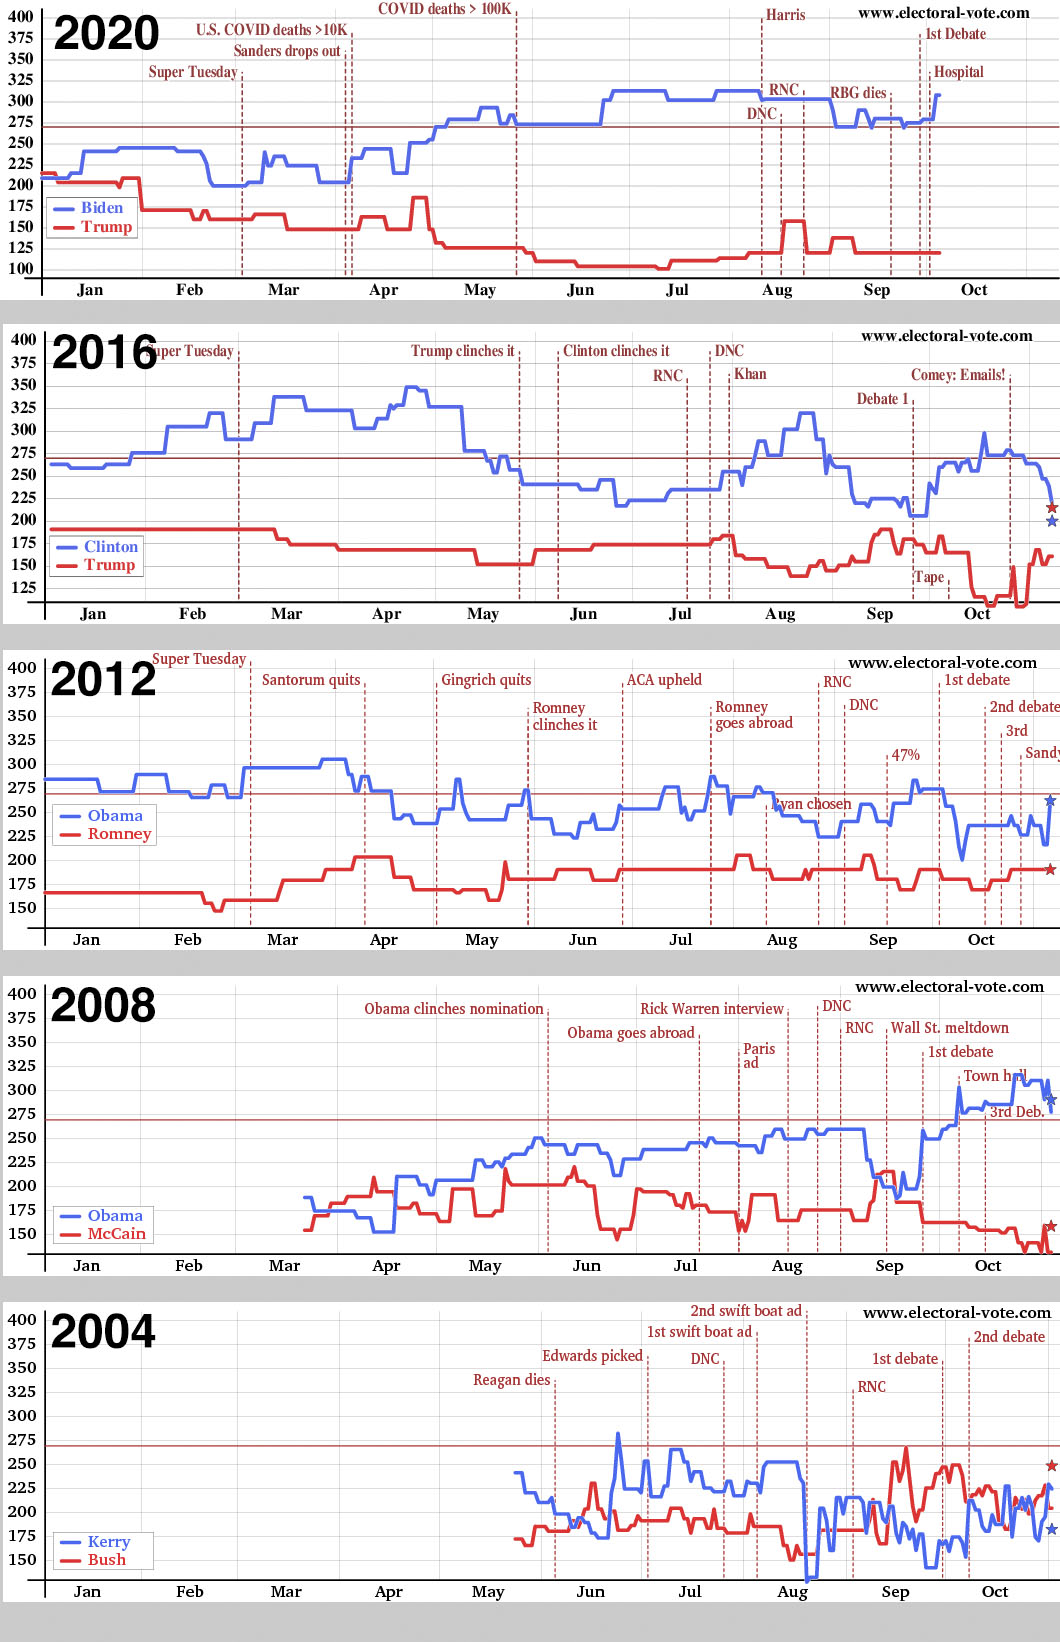 Electoral vote graphs from 2004 to 2020